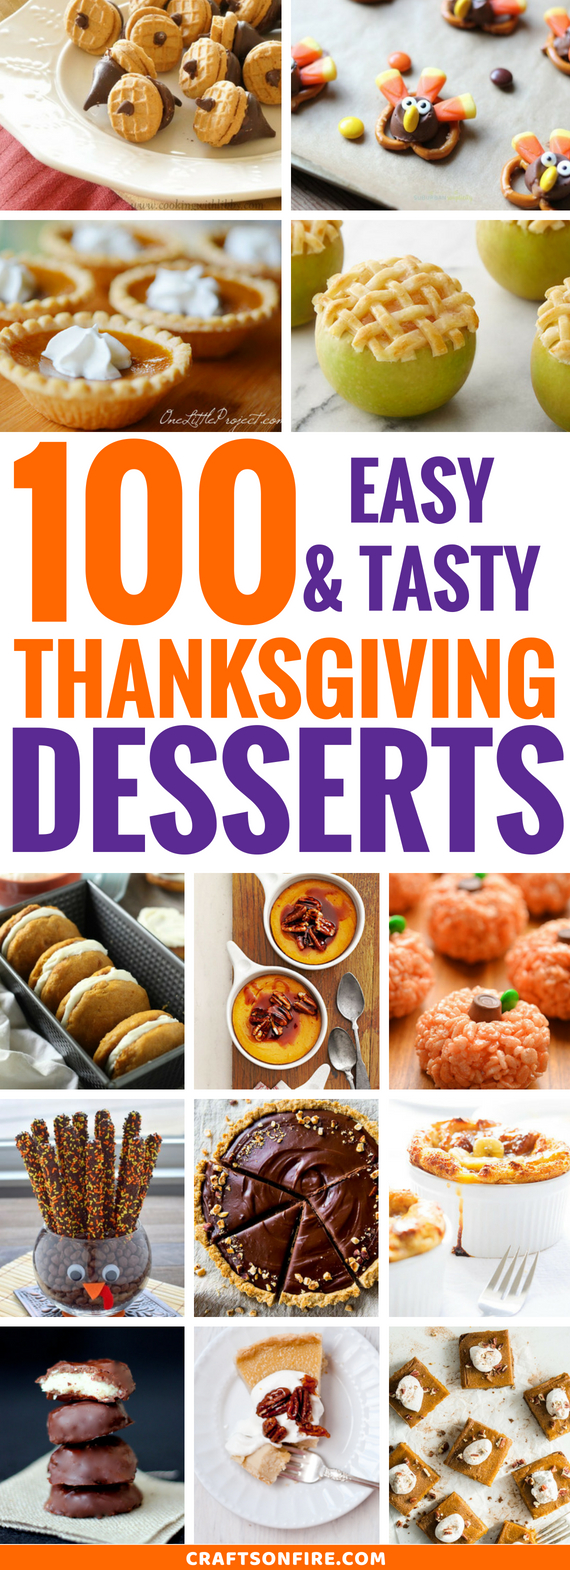 Easy Thanksgiving desserts ideas and recipes